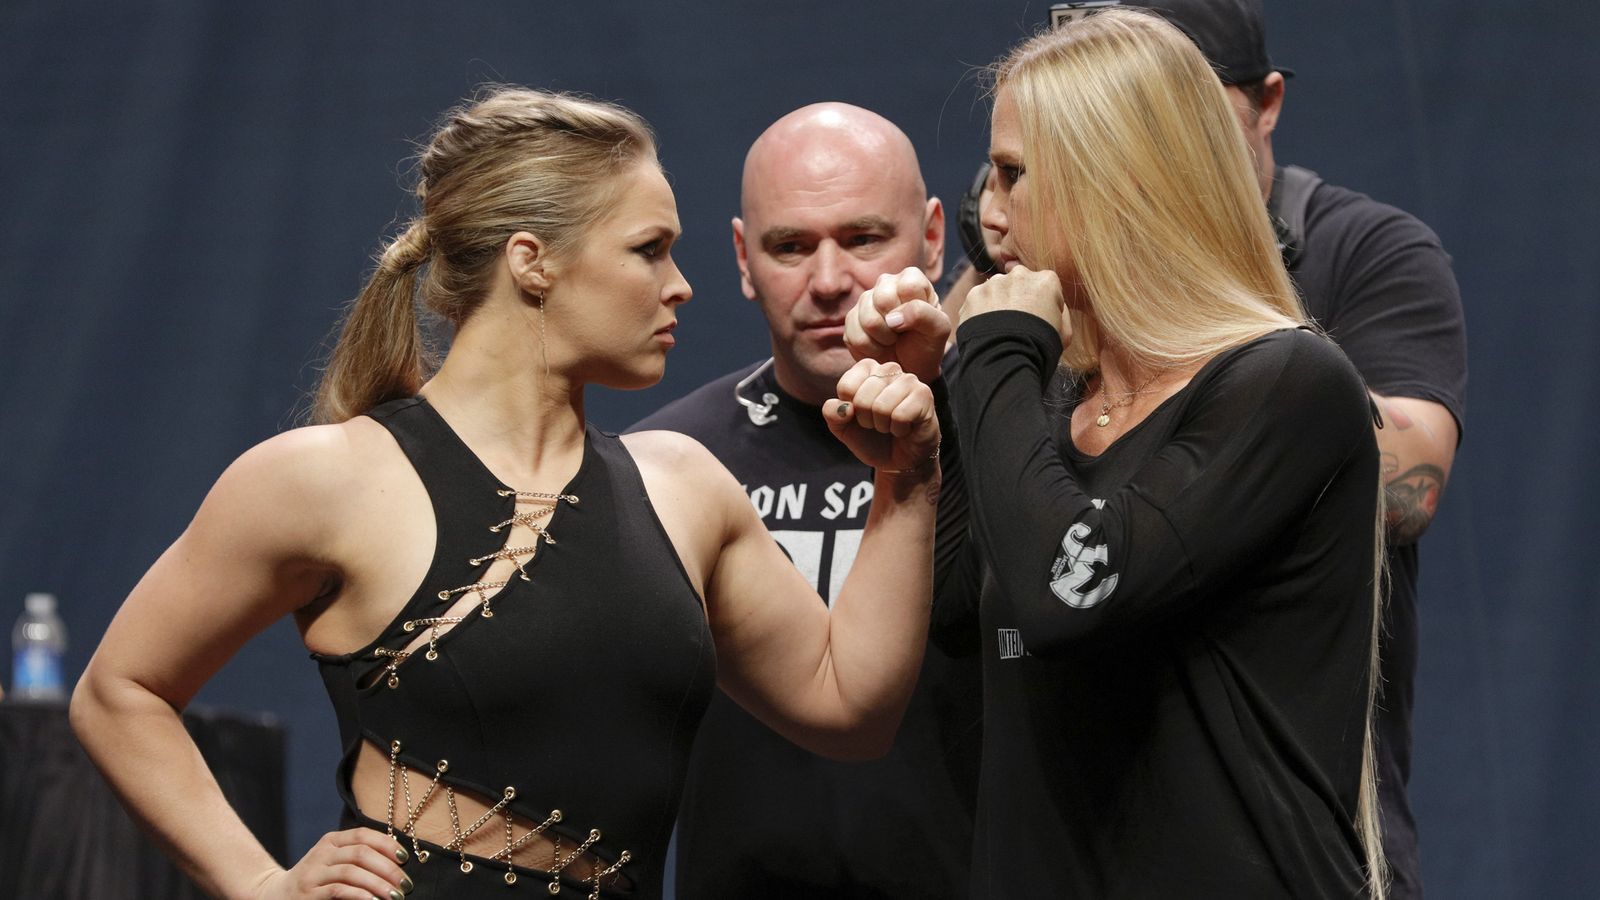 015_Ronda_Rousey_and_Holly_Holm.0.0